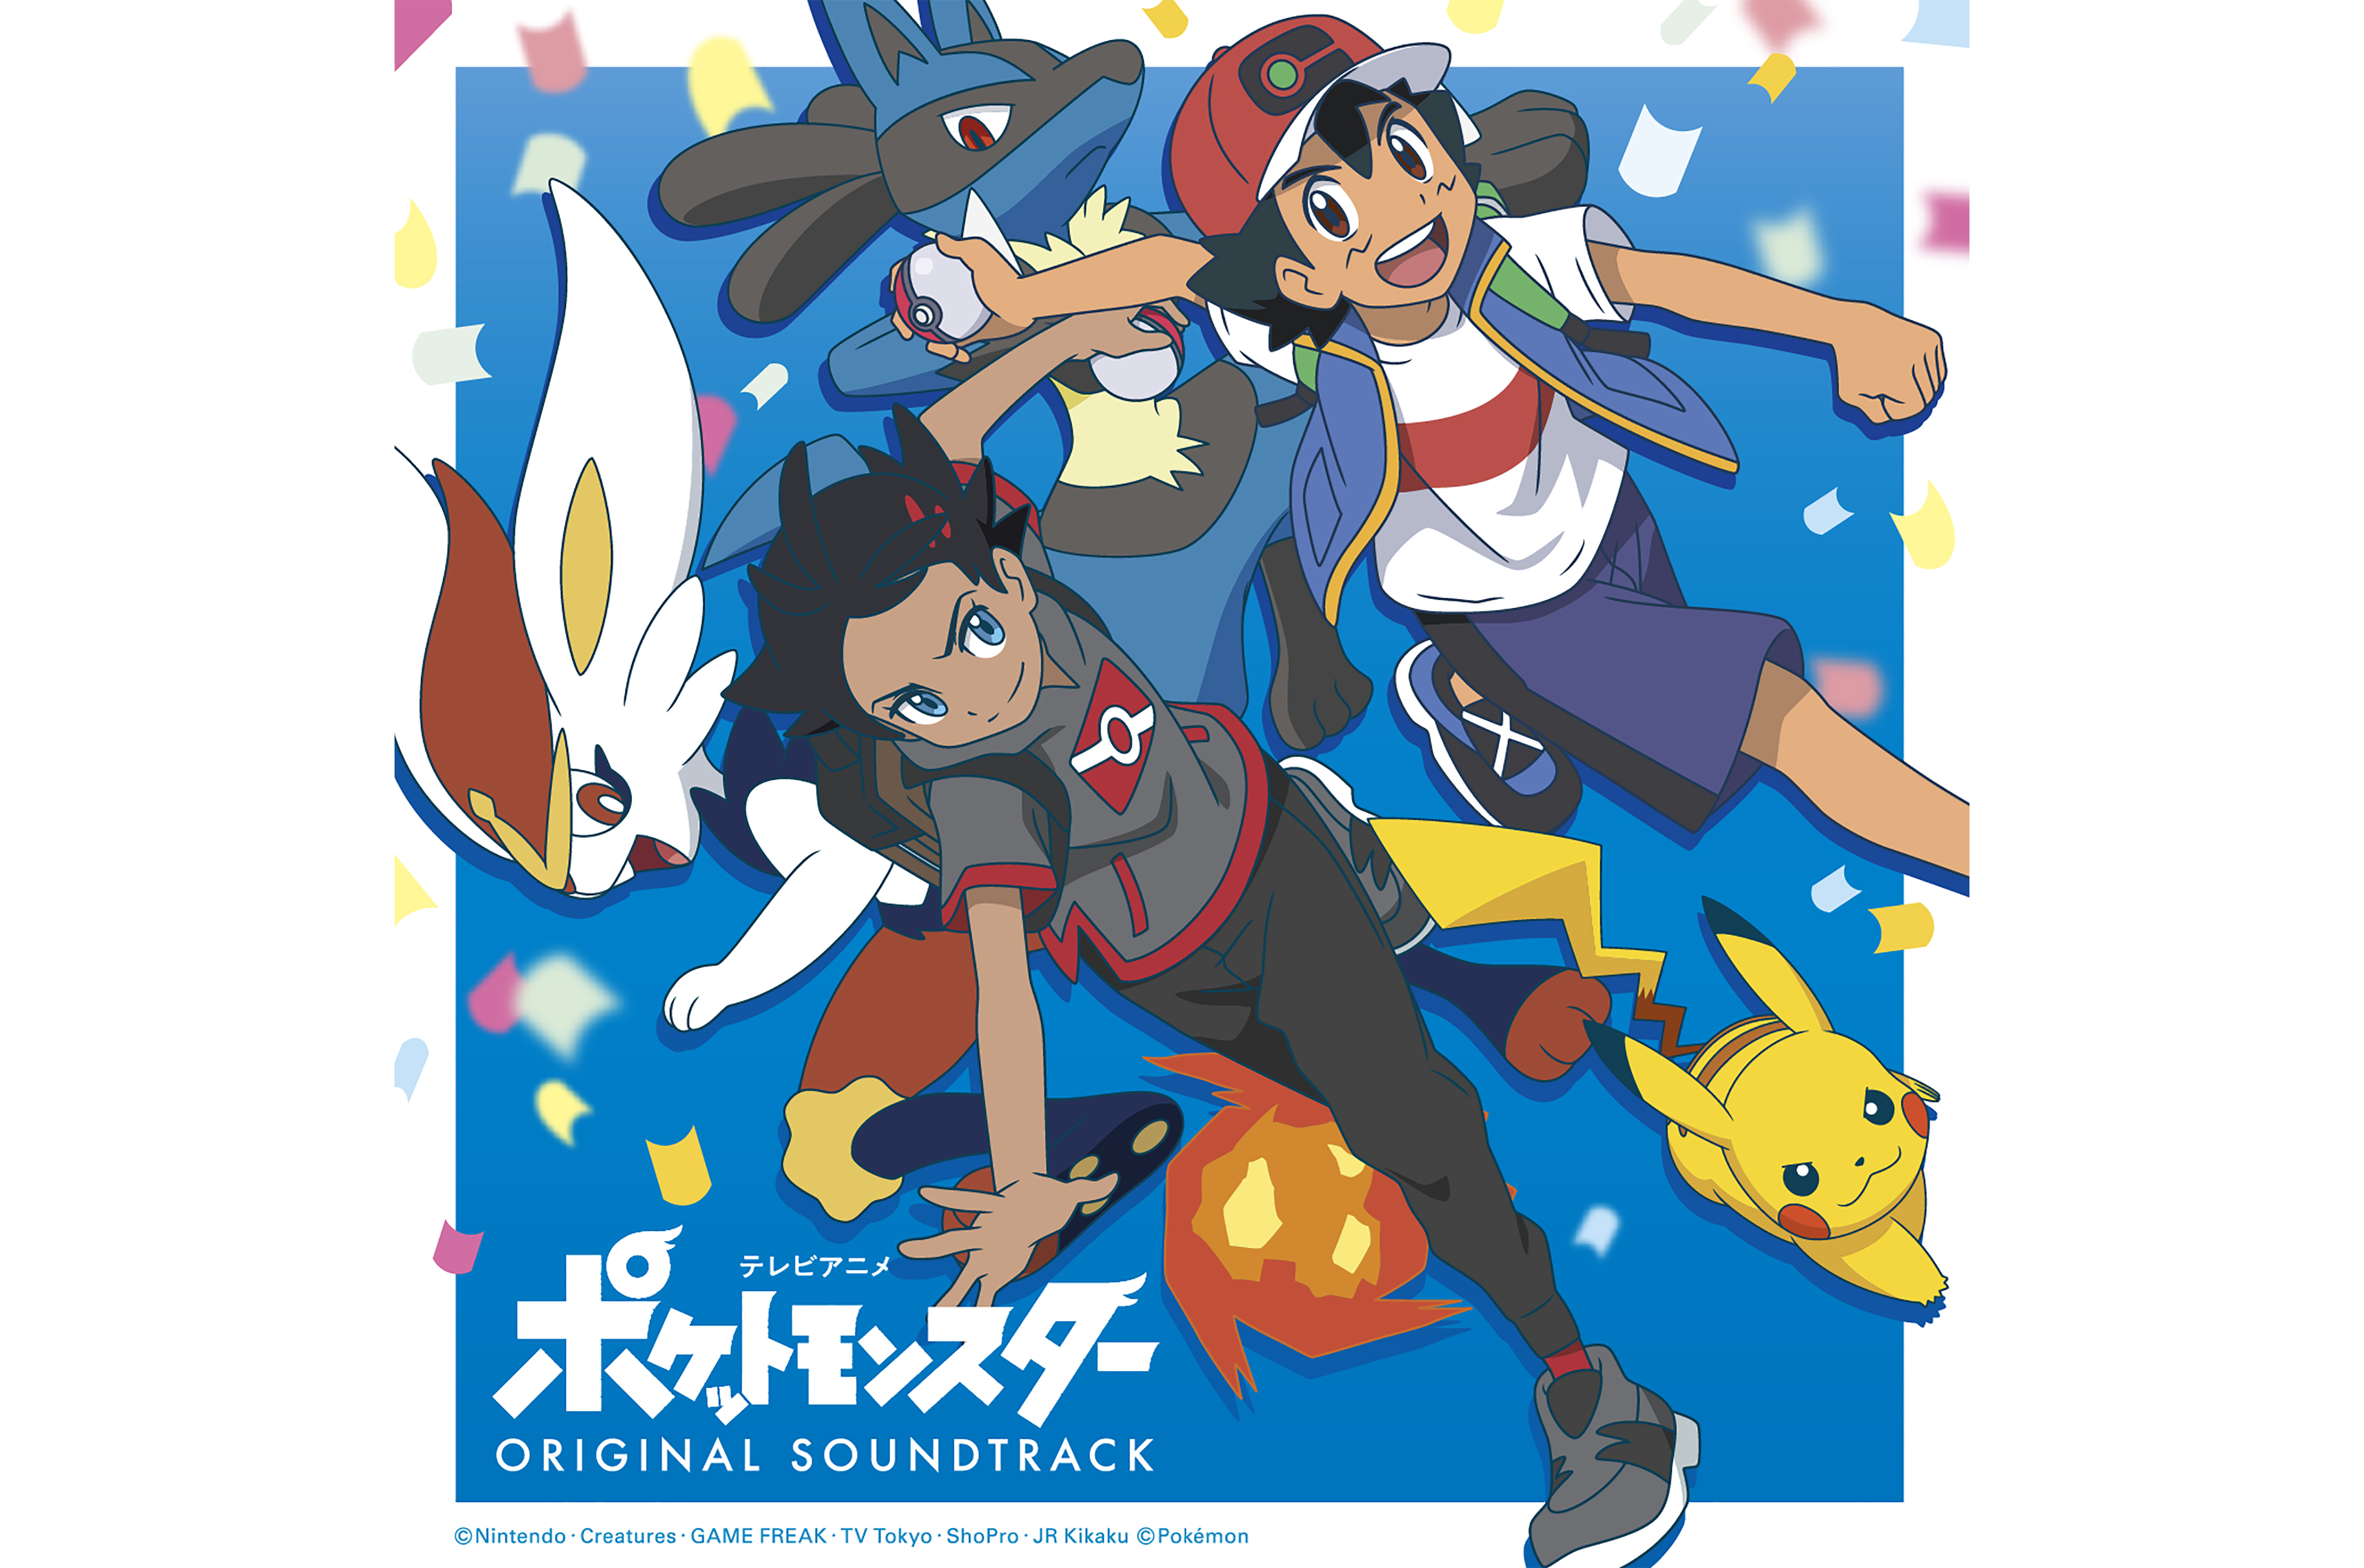 Pokémon anime will release its original soundtrack on CD for the first time  in 10 years | SoraNews24 -Japan News-